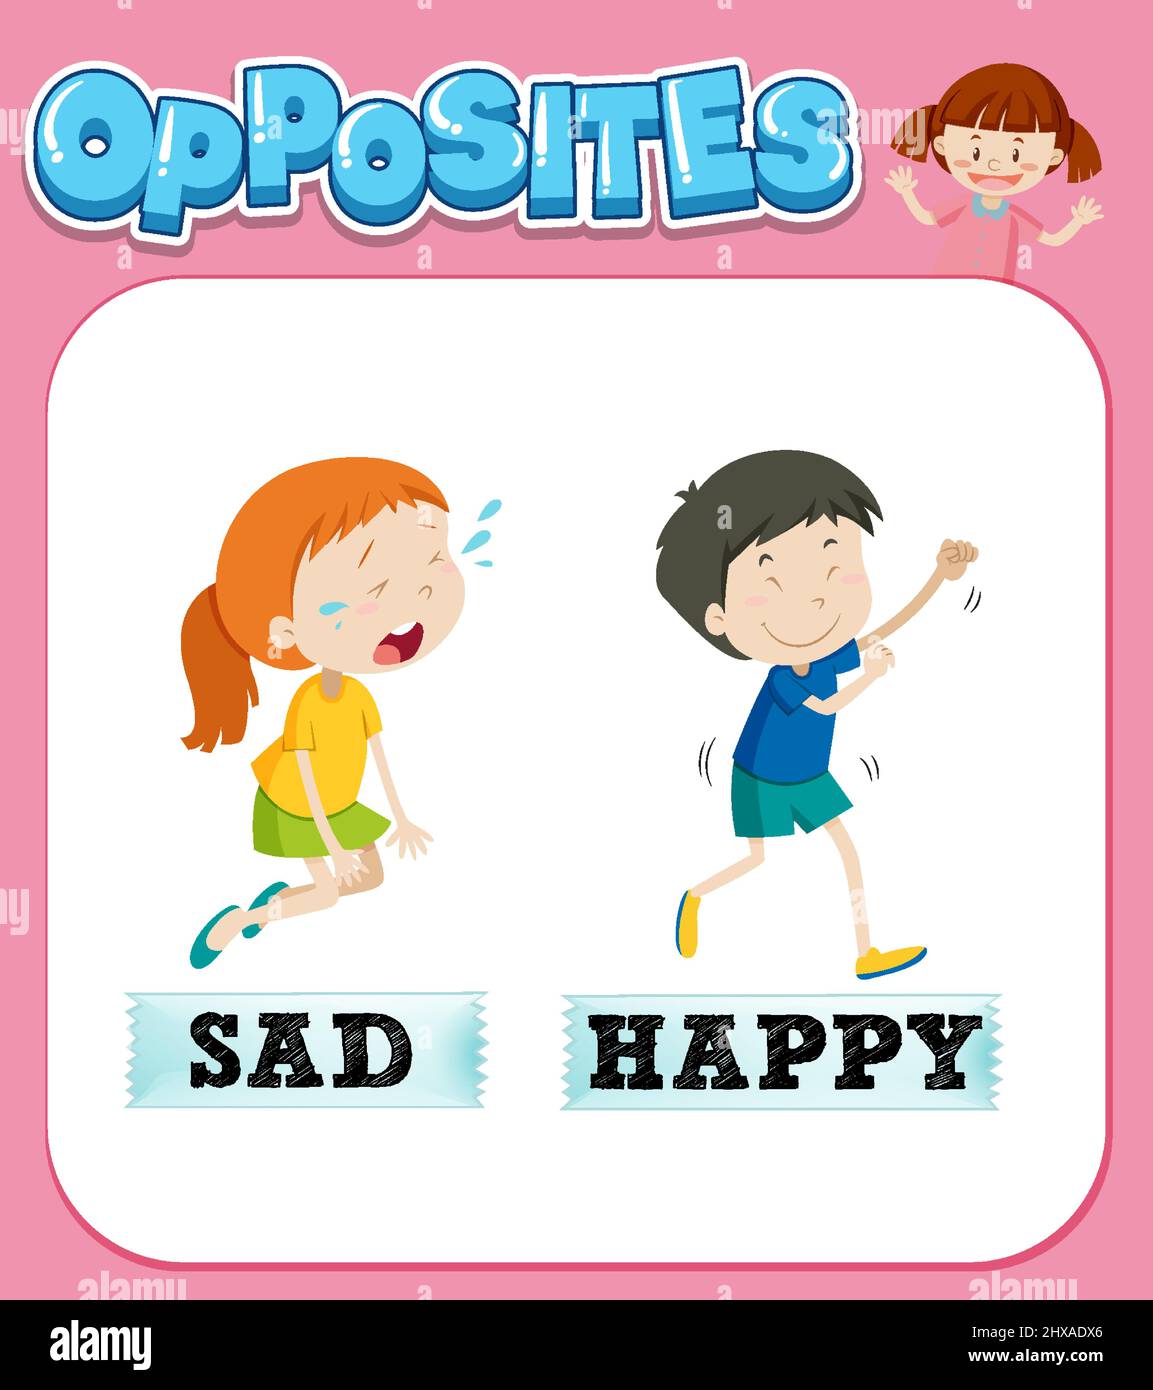 Opposite words for sad and happy illustration Stock Vector Image ...